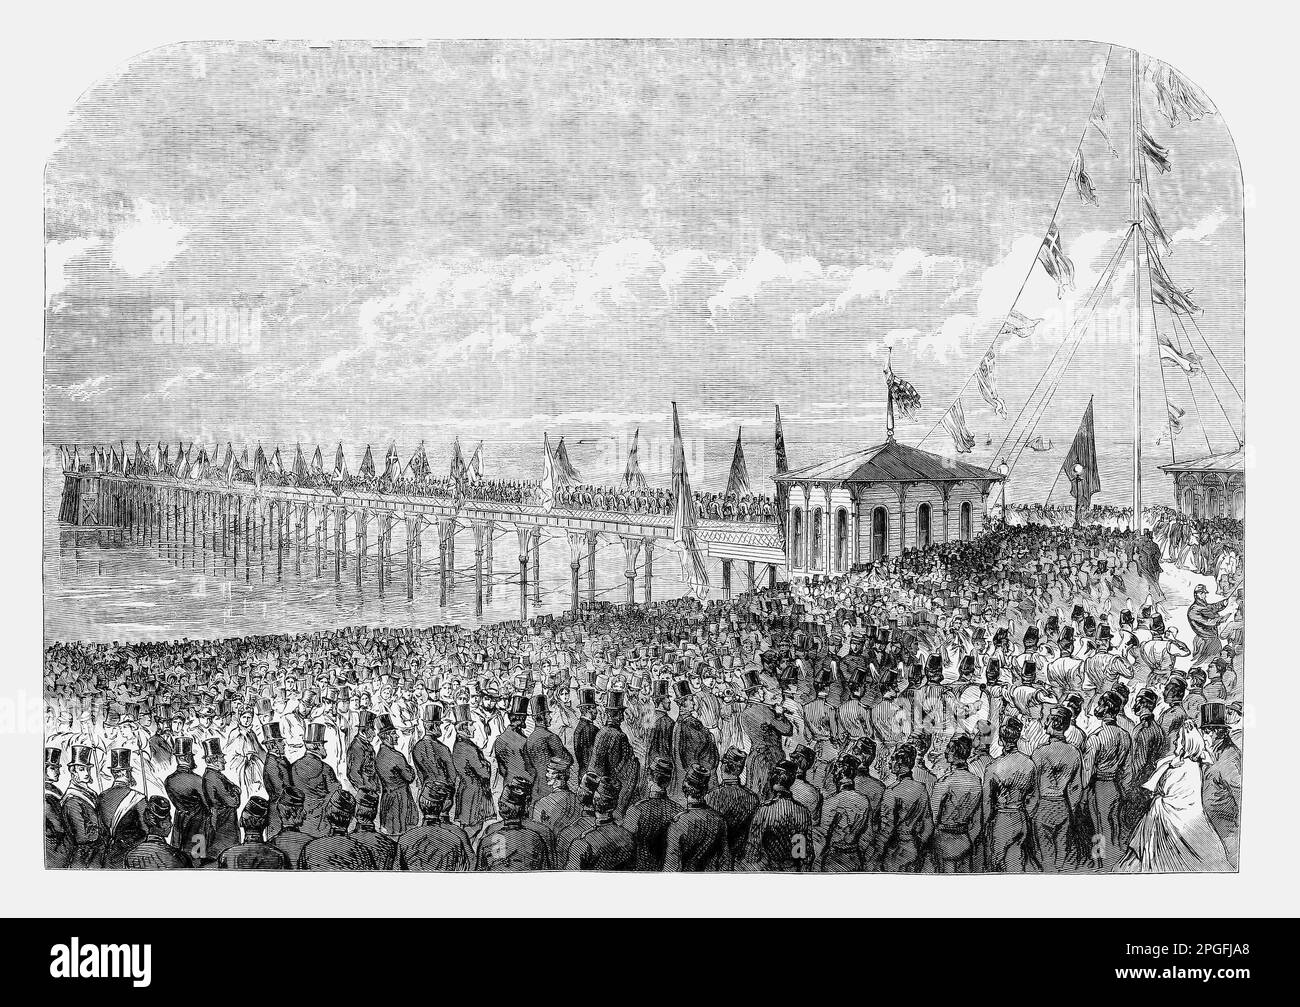 The opening of the new pier at Deal, Kent, England, in 1864. A second 1,100 feet (340 m) long pier designed by Eugenius Birch opened, with extensions in 1870 adding a reading room and a pavilion in 1886. It sustained impact damage several times during the 1870s and was acquired by Deal Council in 1920. A popular pleasure pier, it survived until the Second World War, when it was struck and severely damaged by a mined Dutch ship, the Nora, in January 1940. Stock Photo